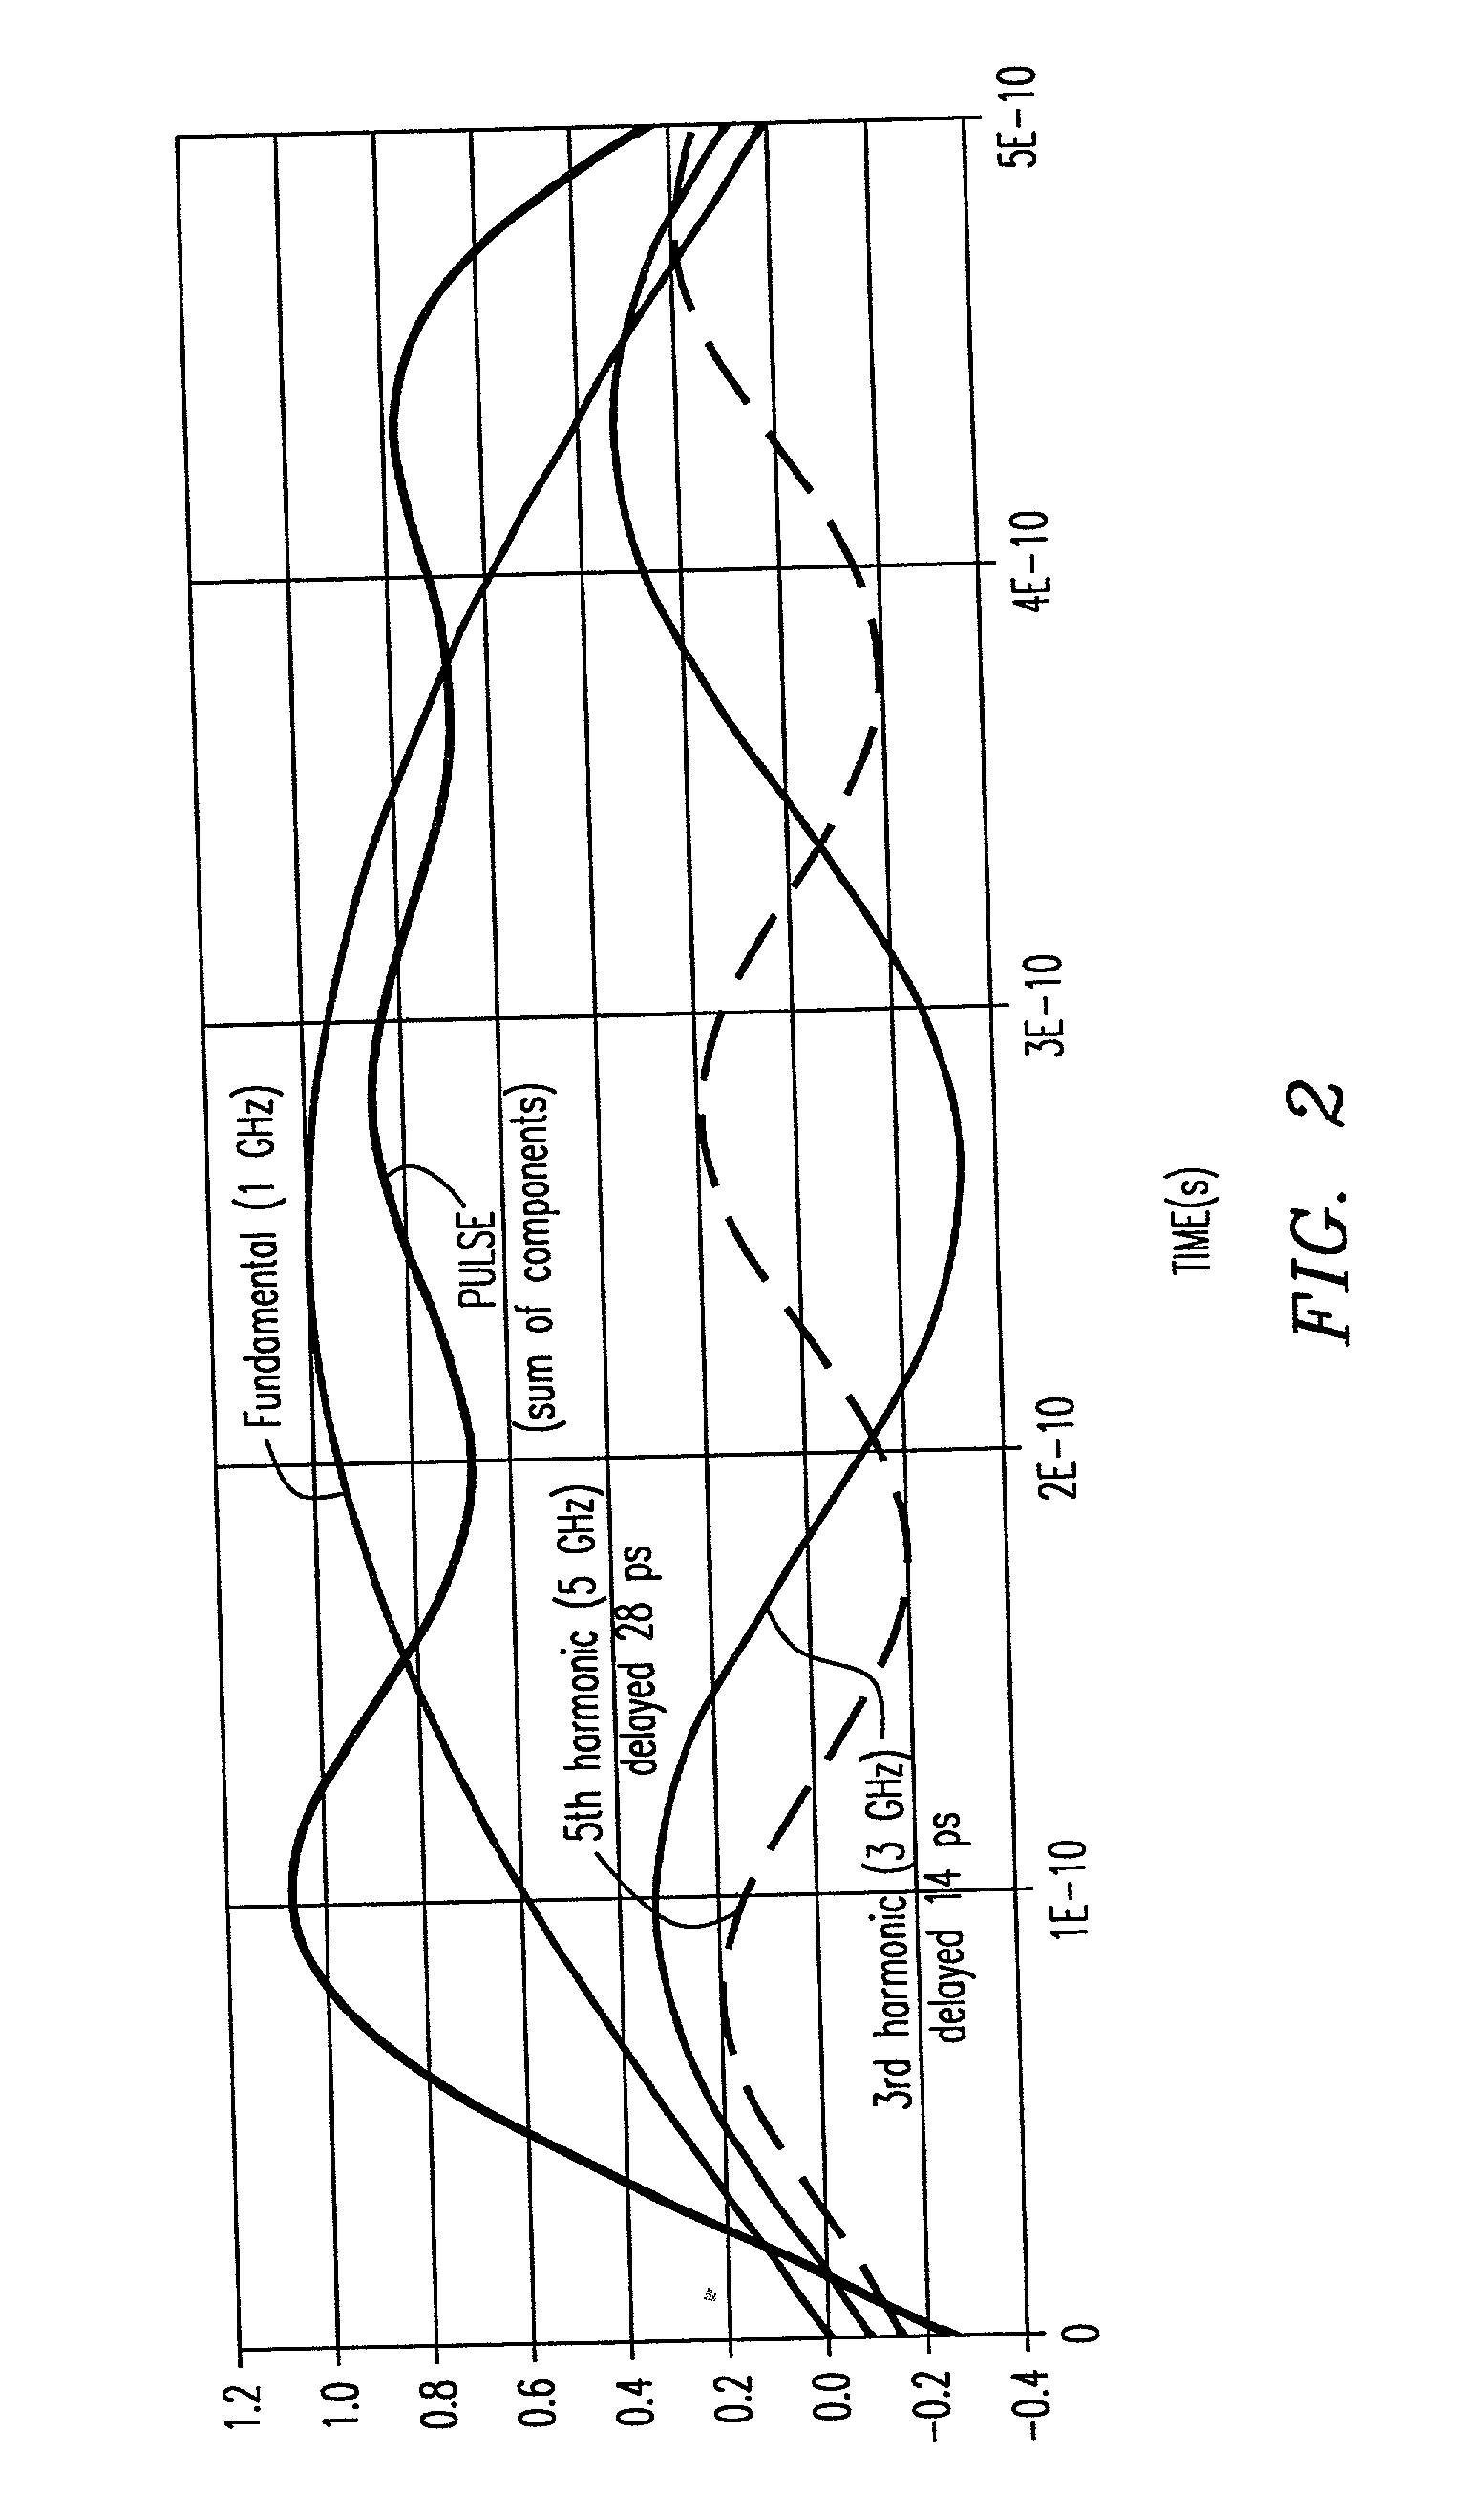 Group delay equalizer integrated with a wideband distributed amplifier monolithic microwave integrated circuit